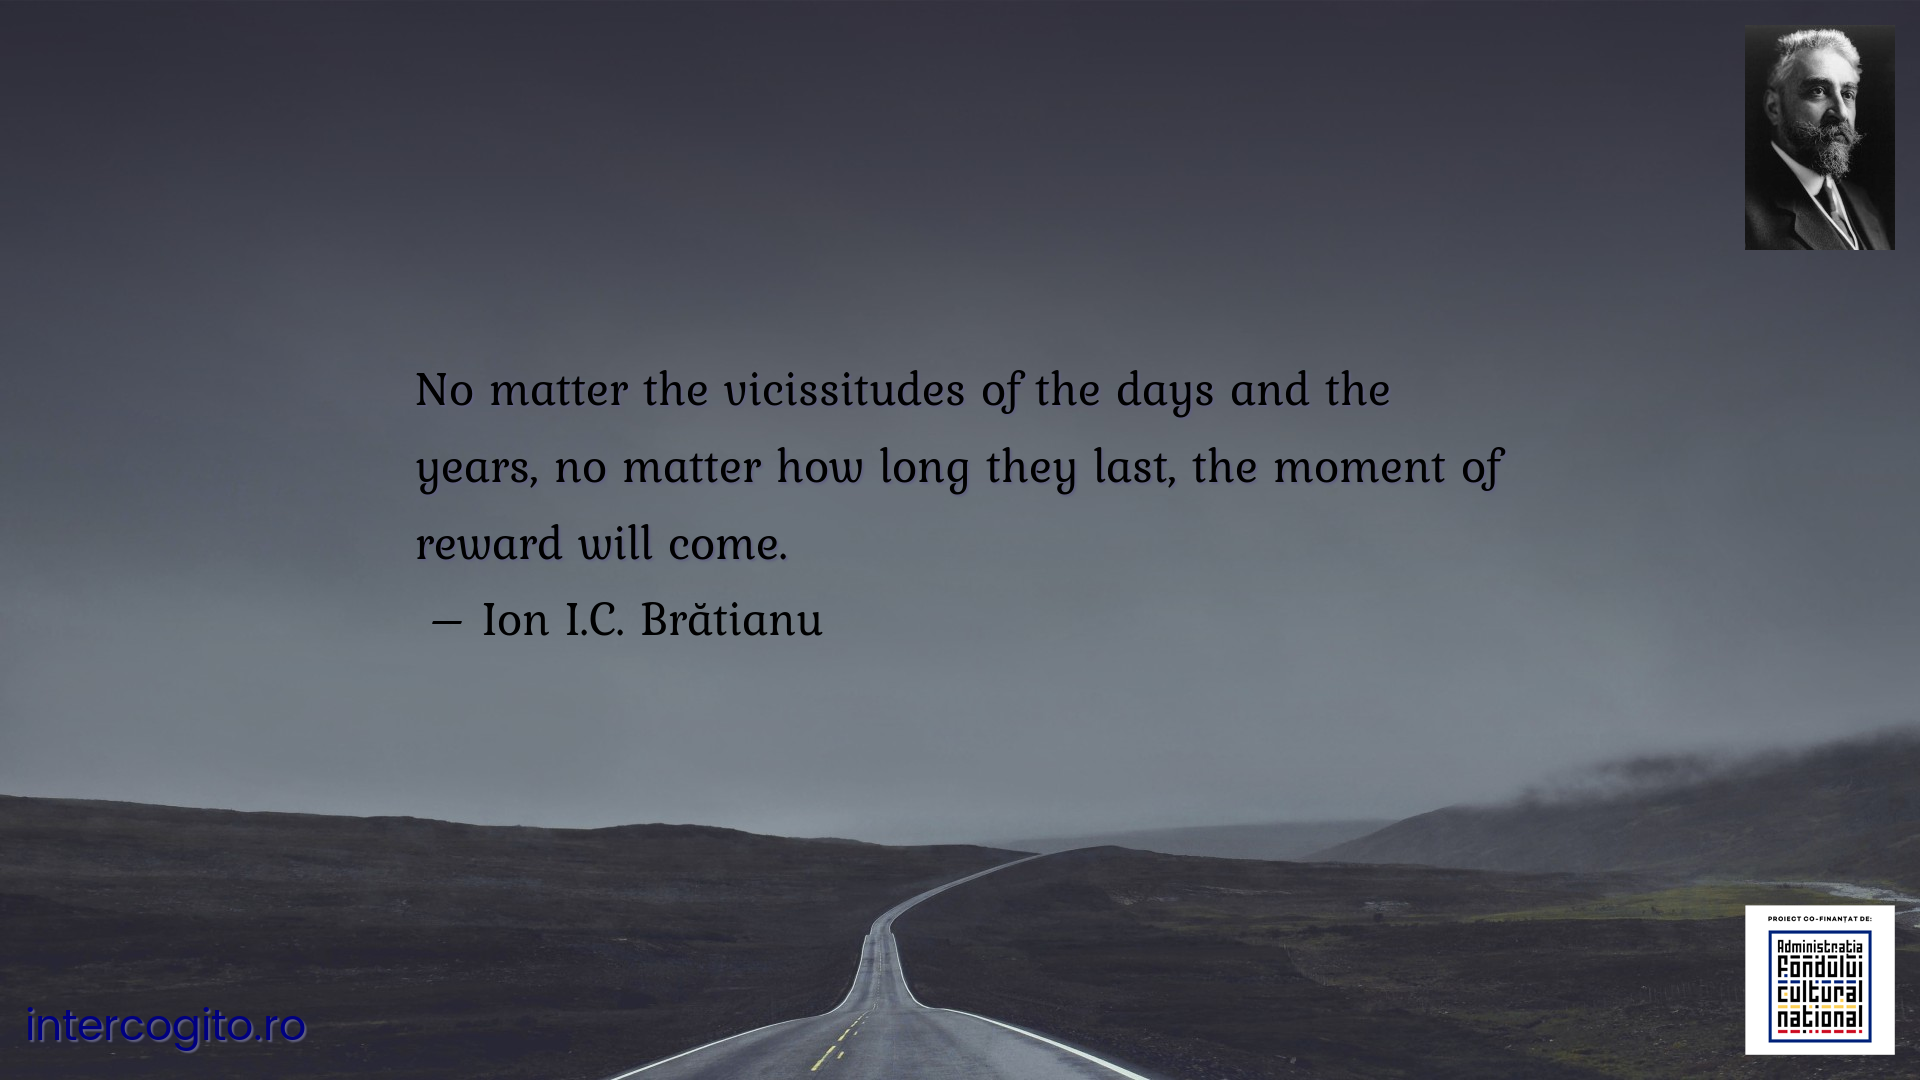 No matter the vicissitudes of the days and the years, no matter how long they last, the moment of reward will come.